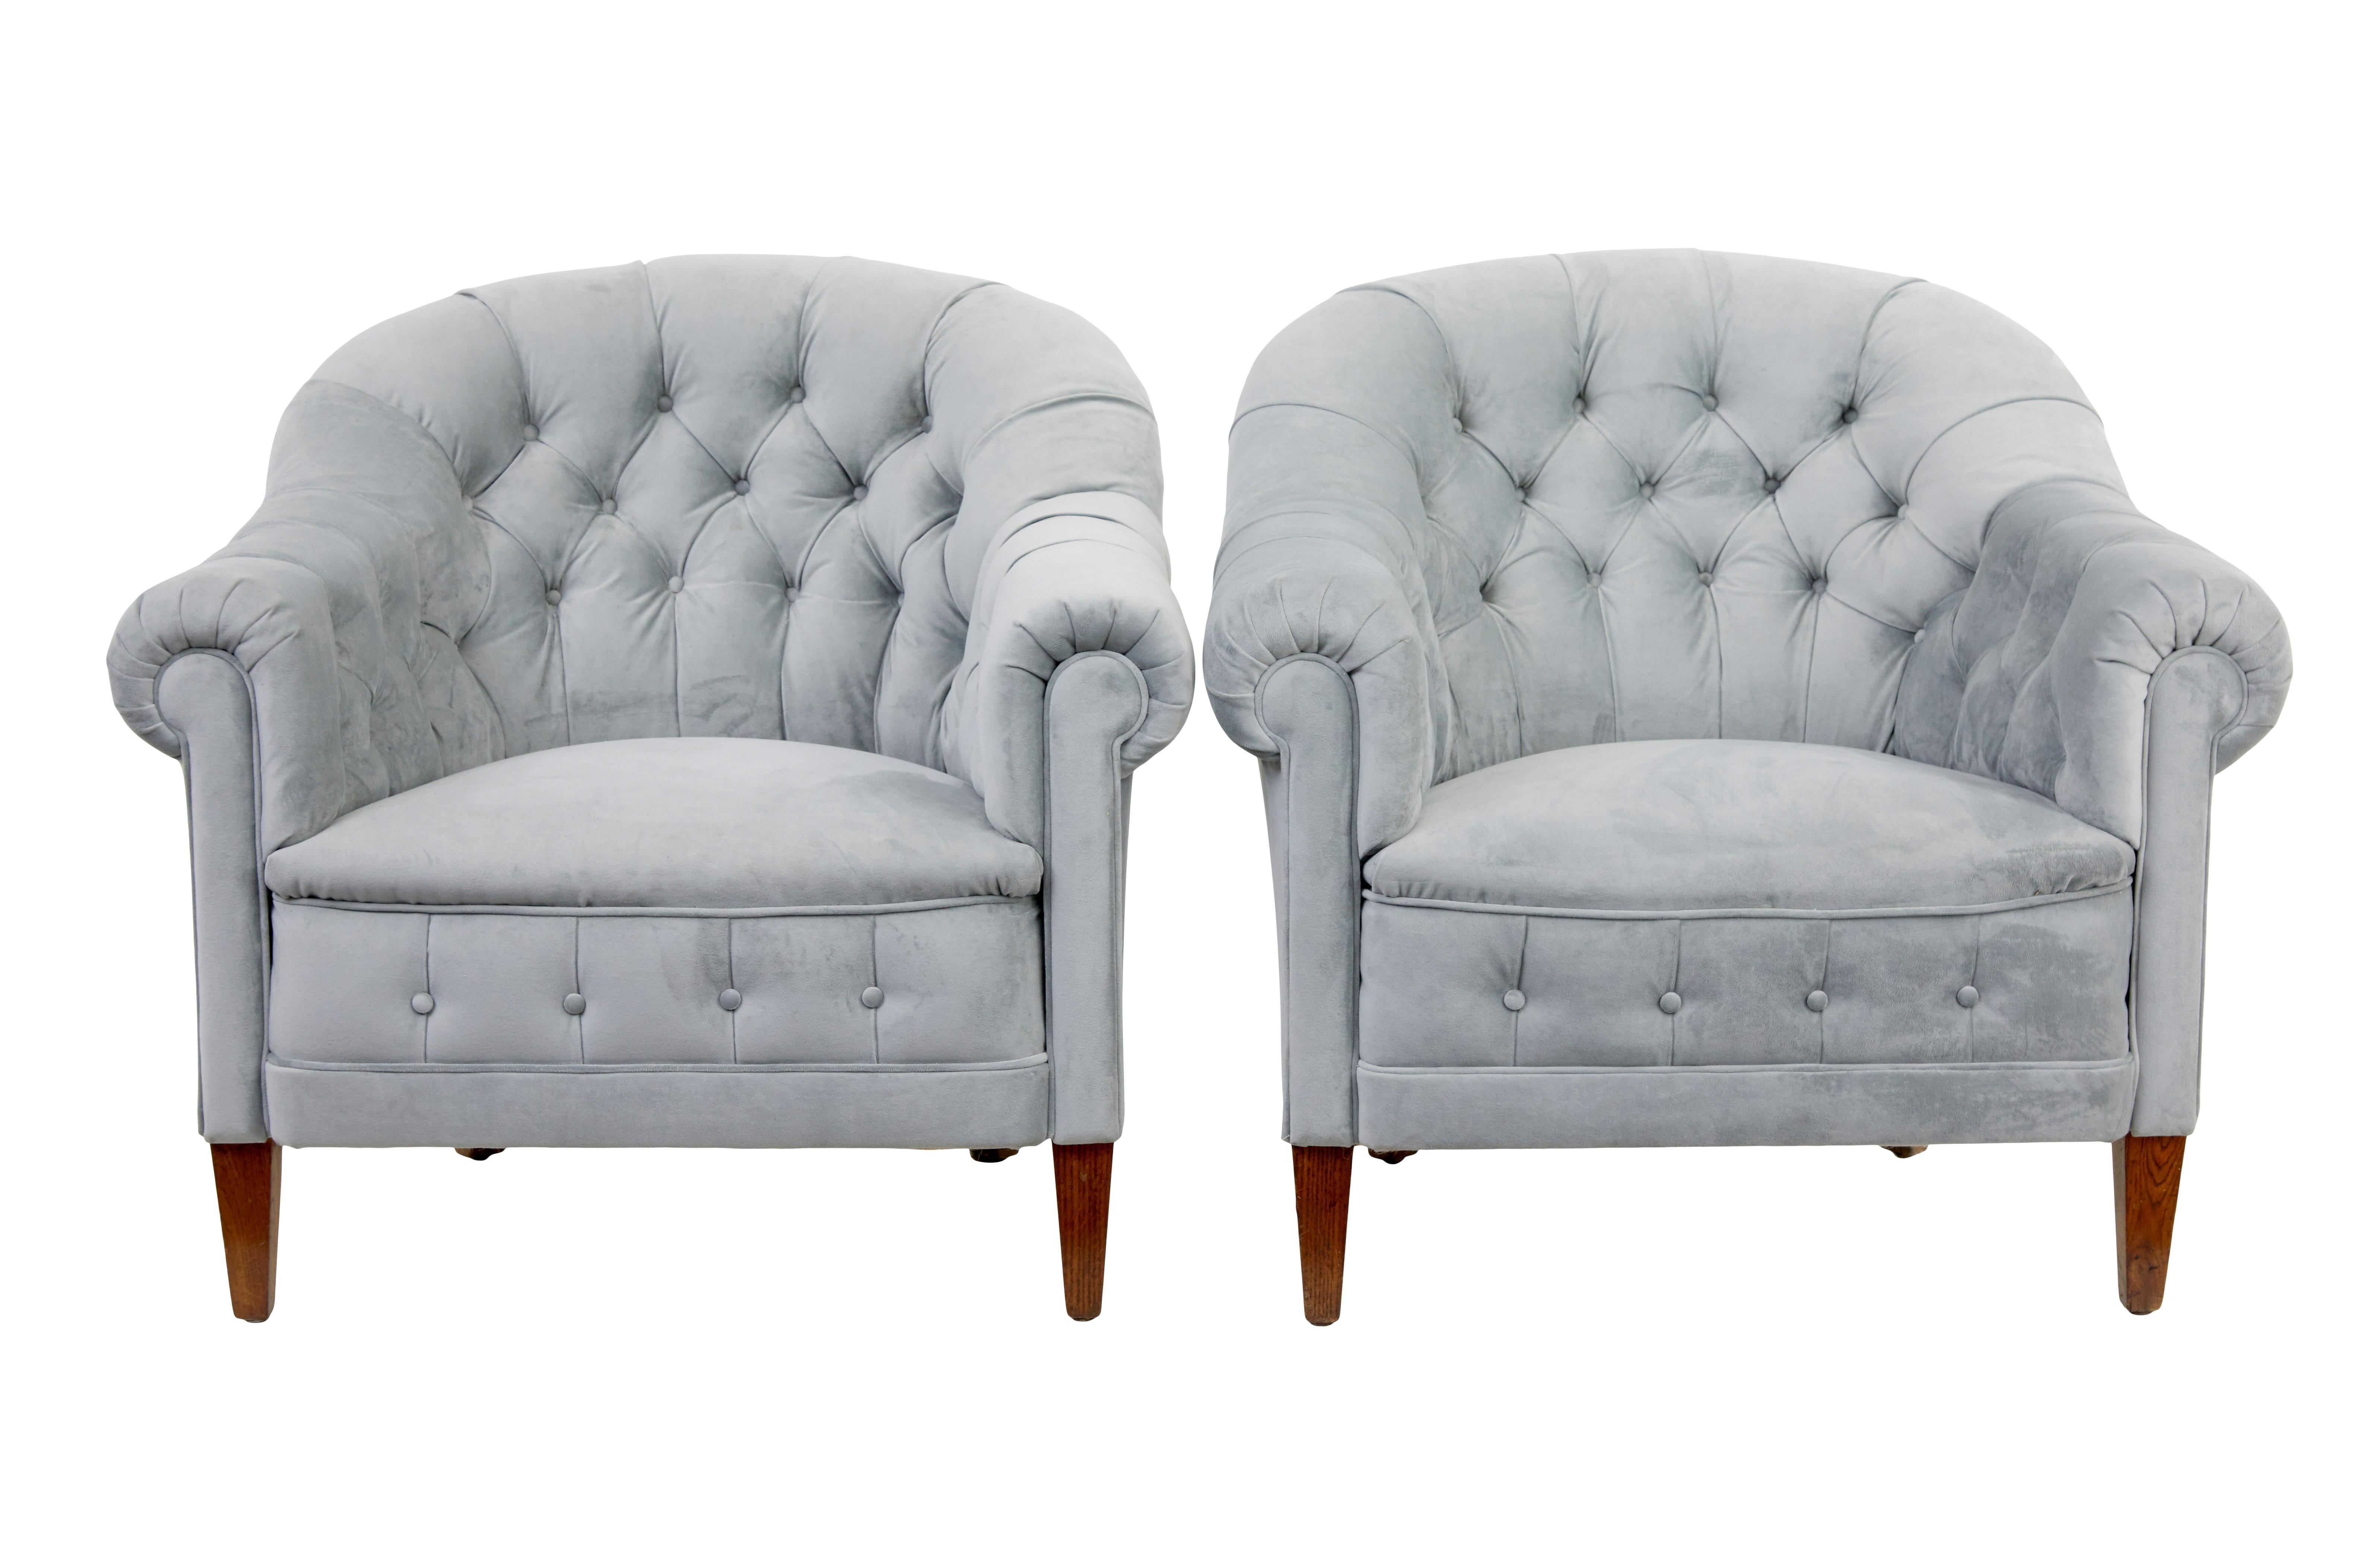 Early 20th century buttonback 3 piece suite sofa and 2 chairs For Sale 2